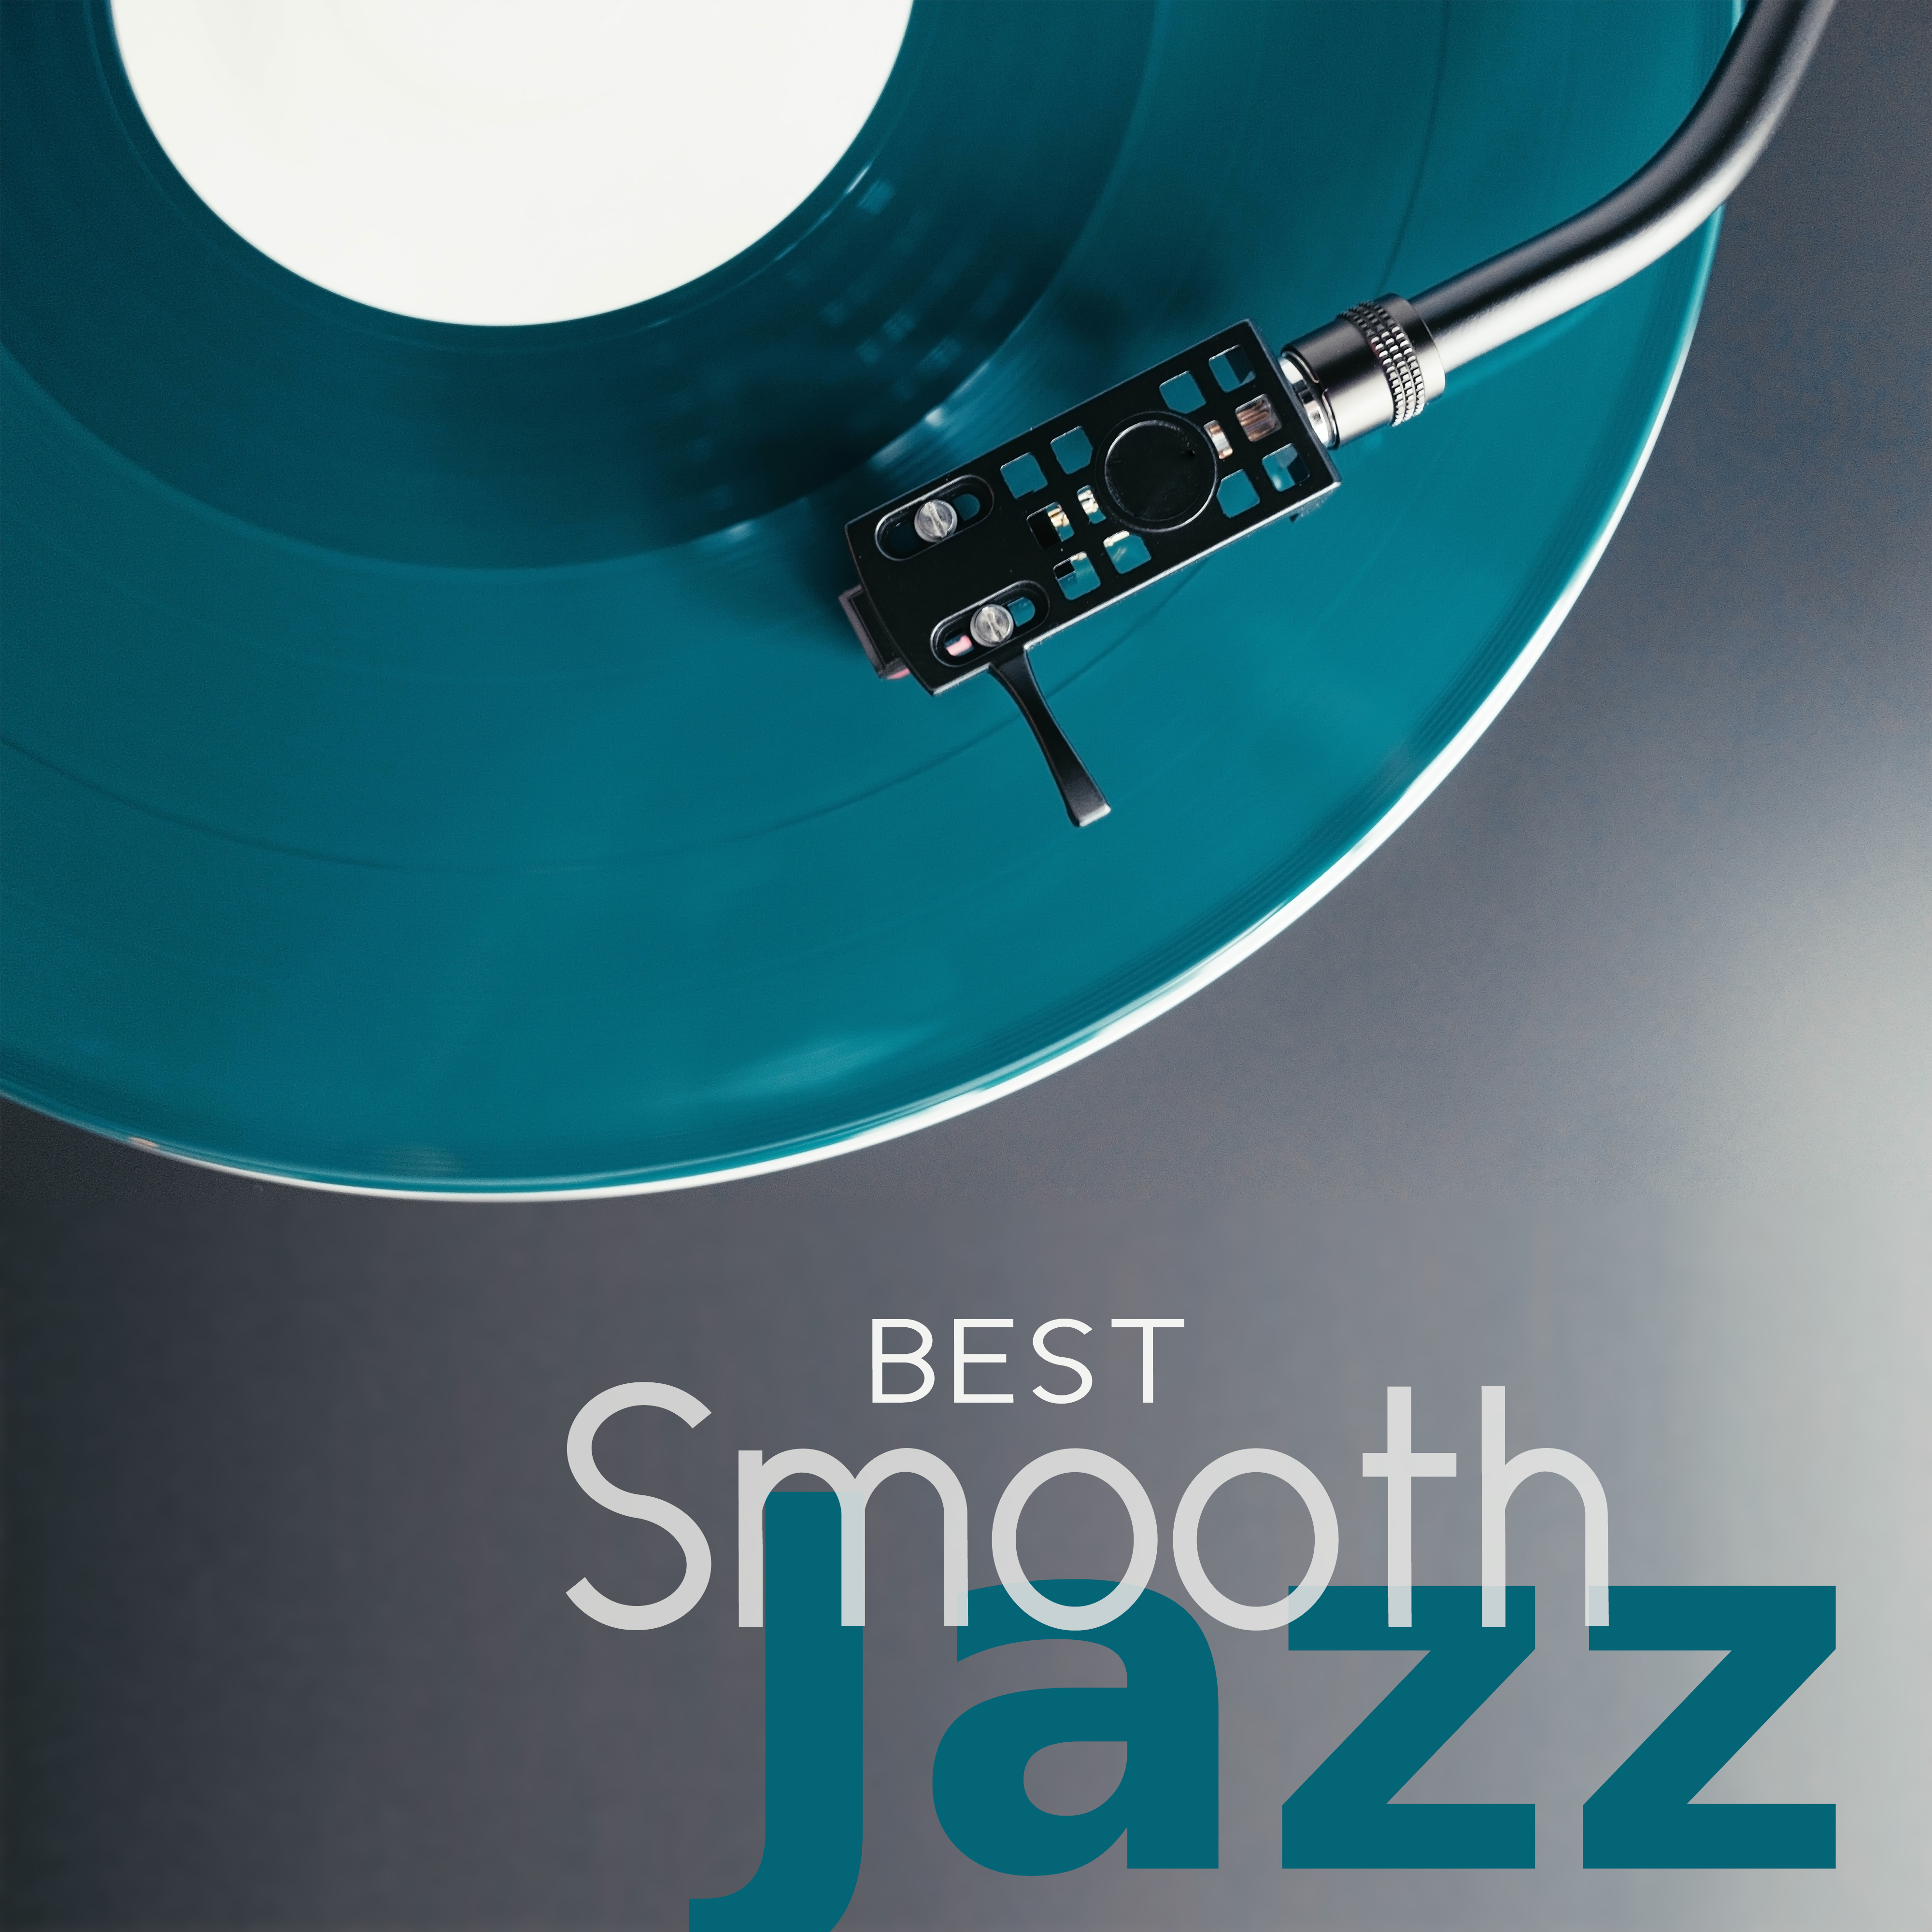 Best Smooth Jazz  Instrumental Music for Relaxation, Piano Bar Sounds, Mellow Jazz Cafe, Peaceful Piano, Deep Relax